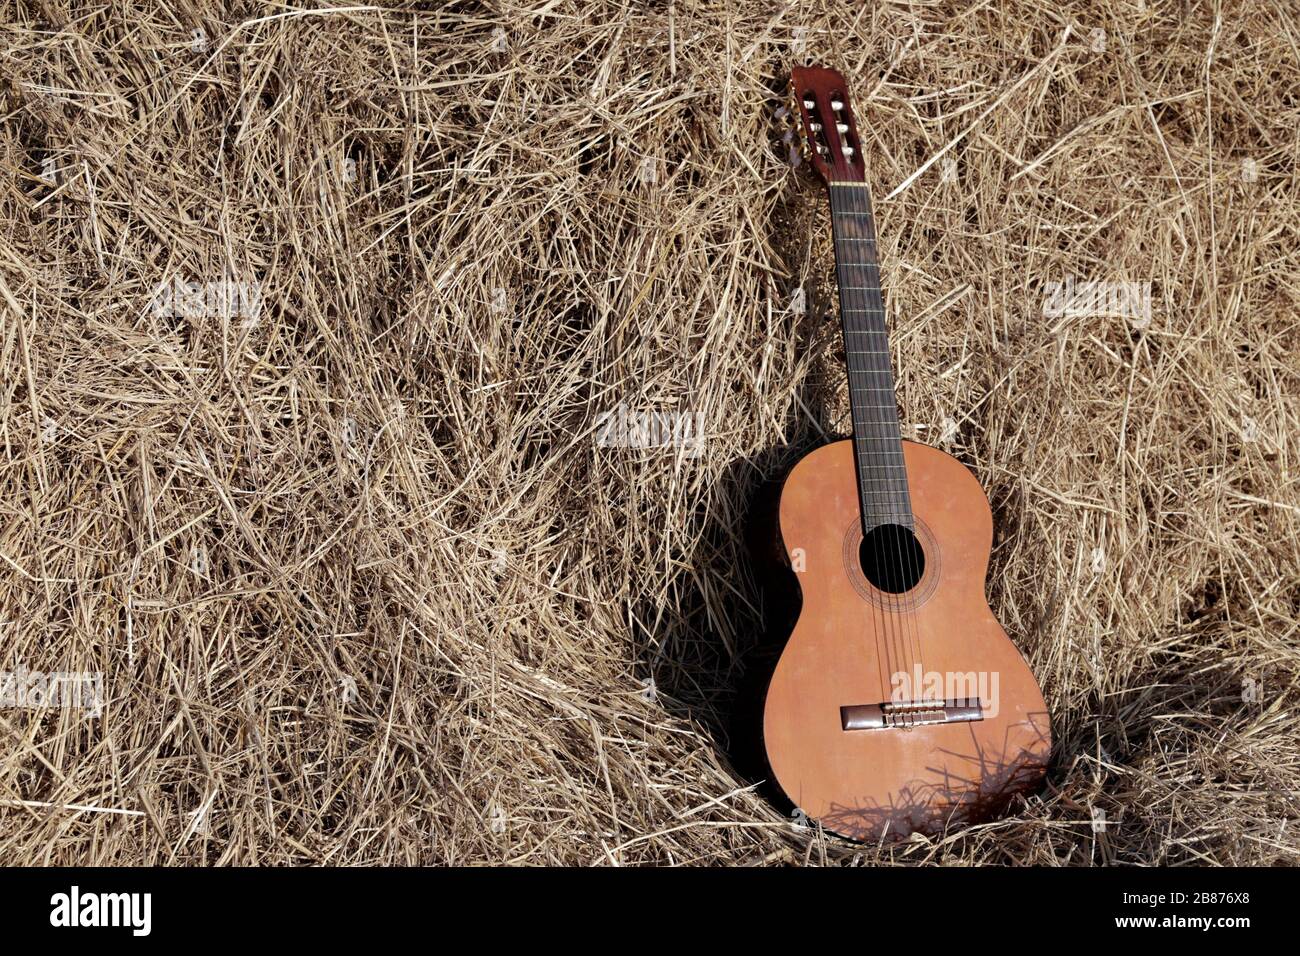 folk guitar on dry straw in country music concept Stock Photo